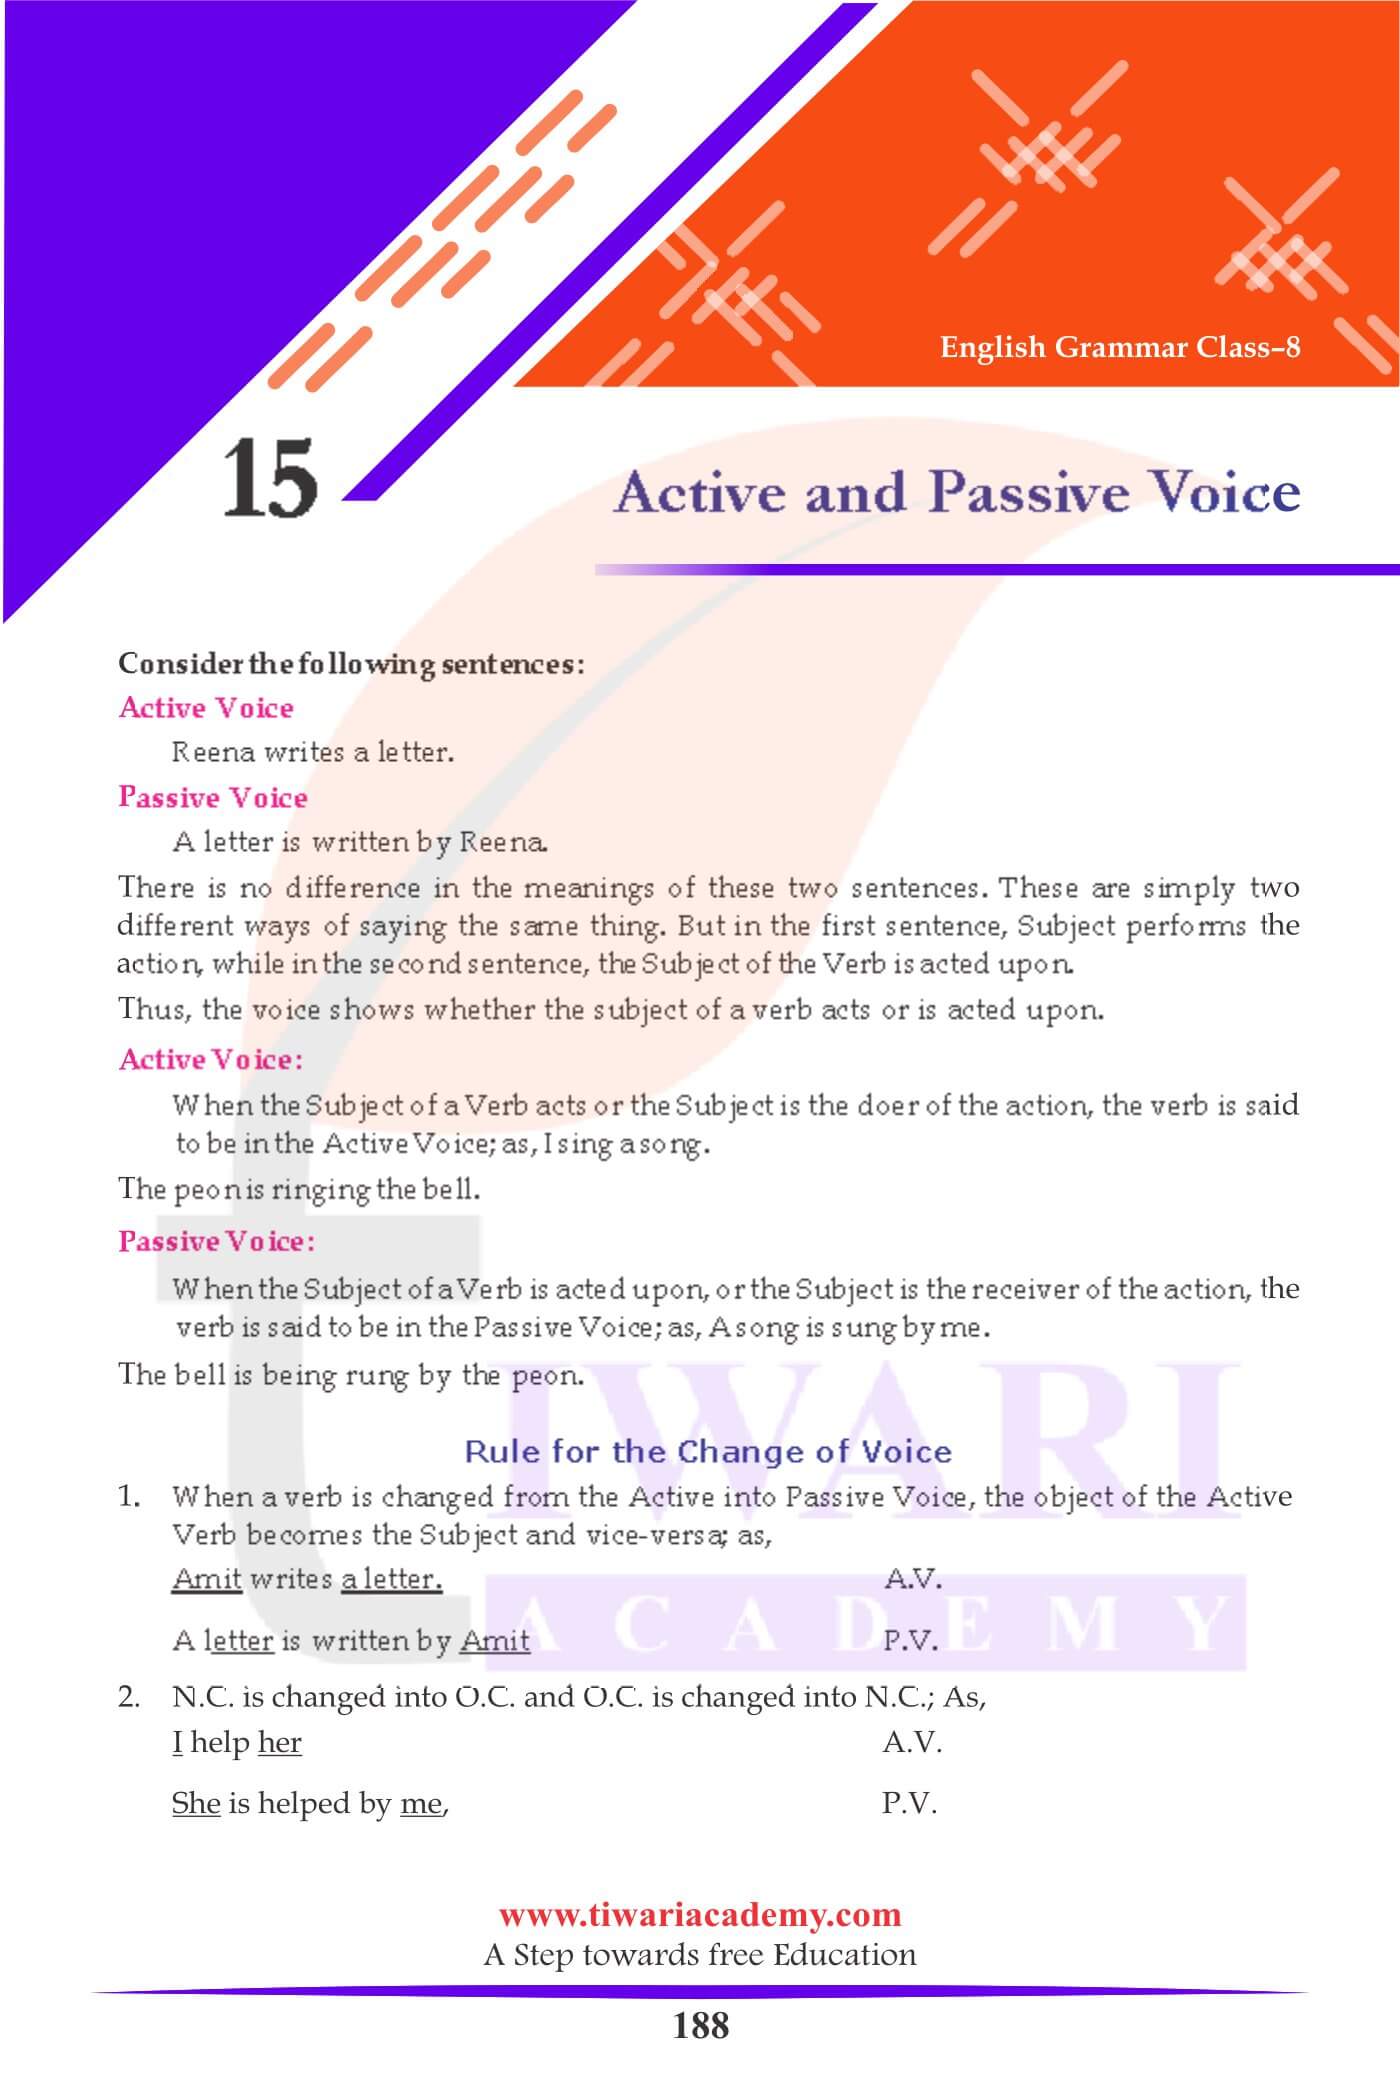 Class 8 English Grammar Chapter 15 Active and Passive Voice